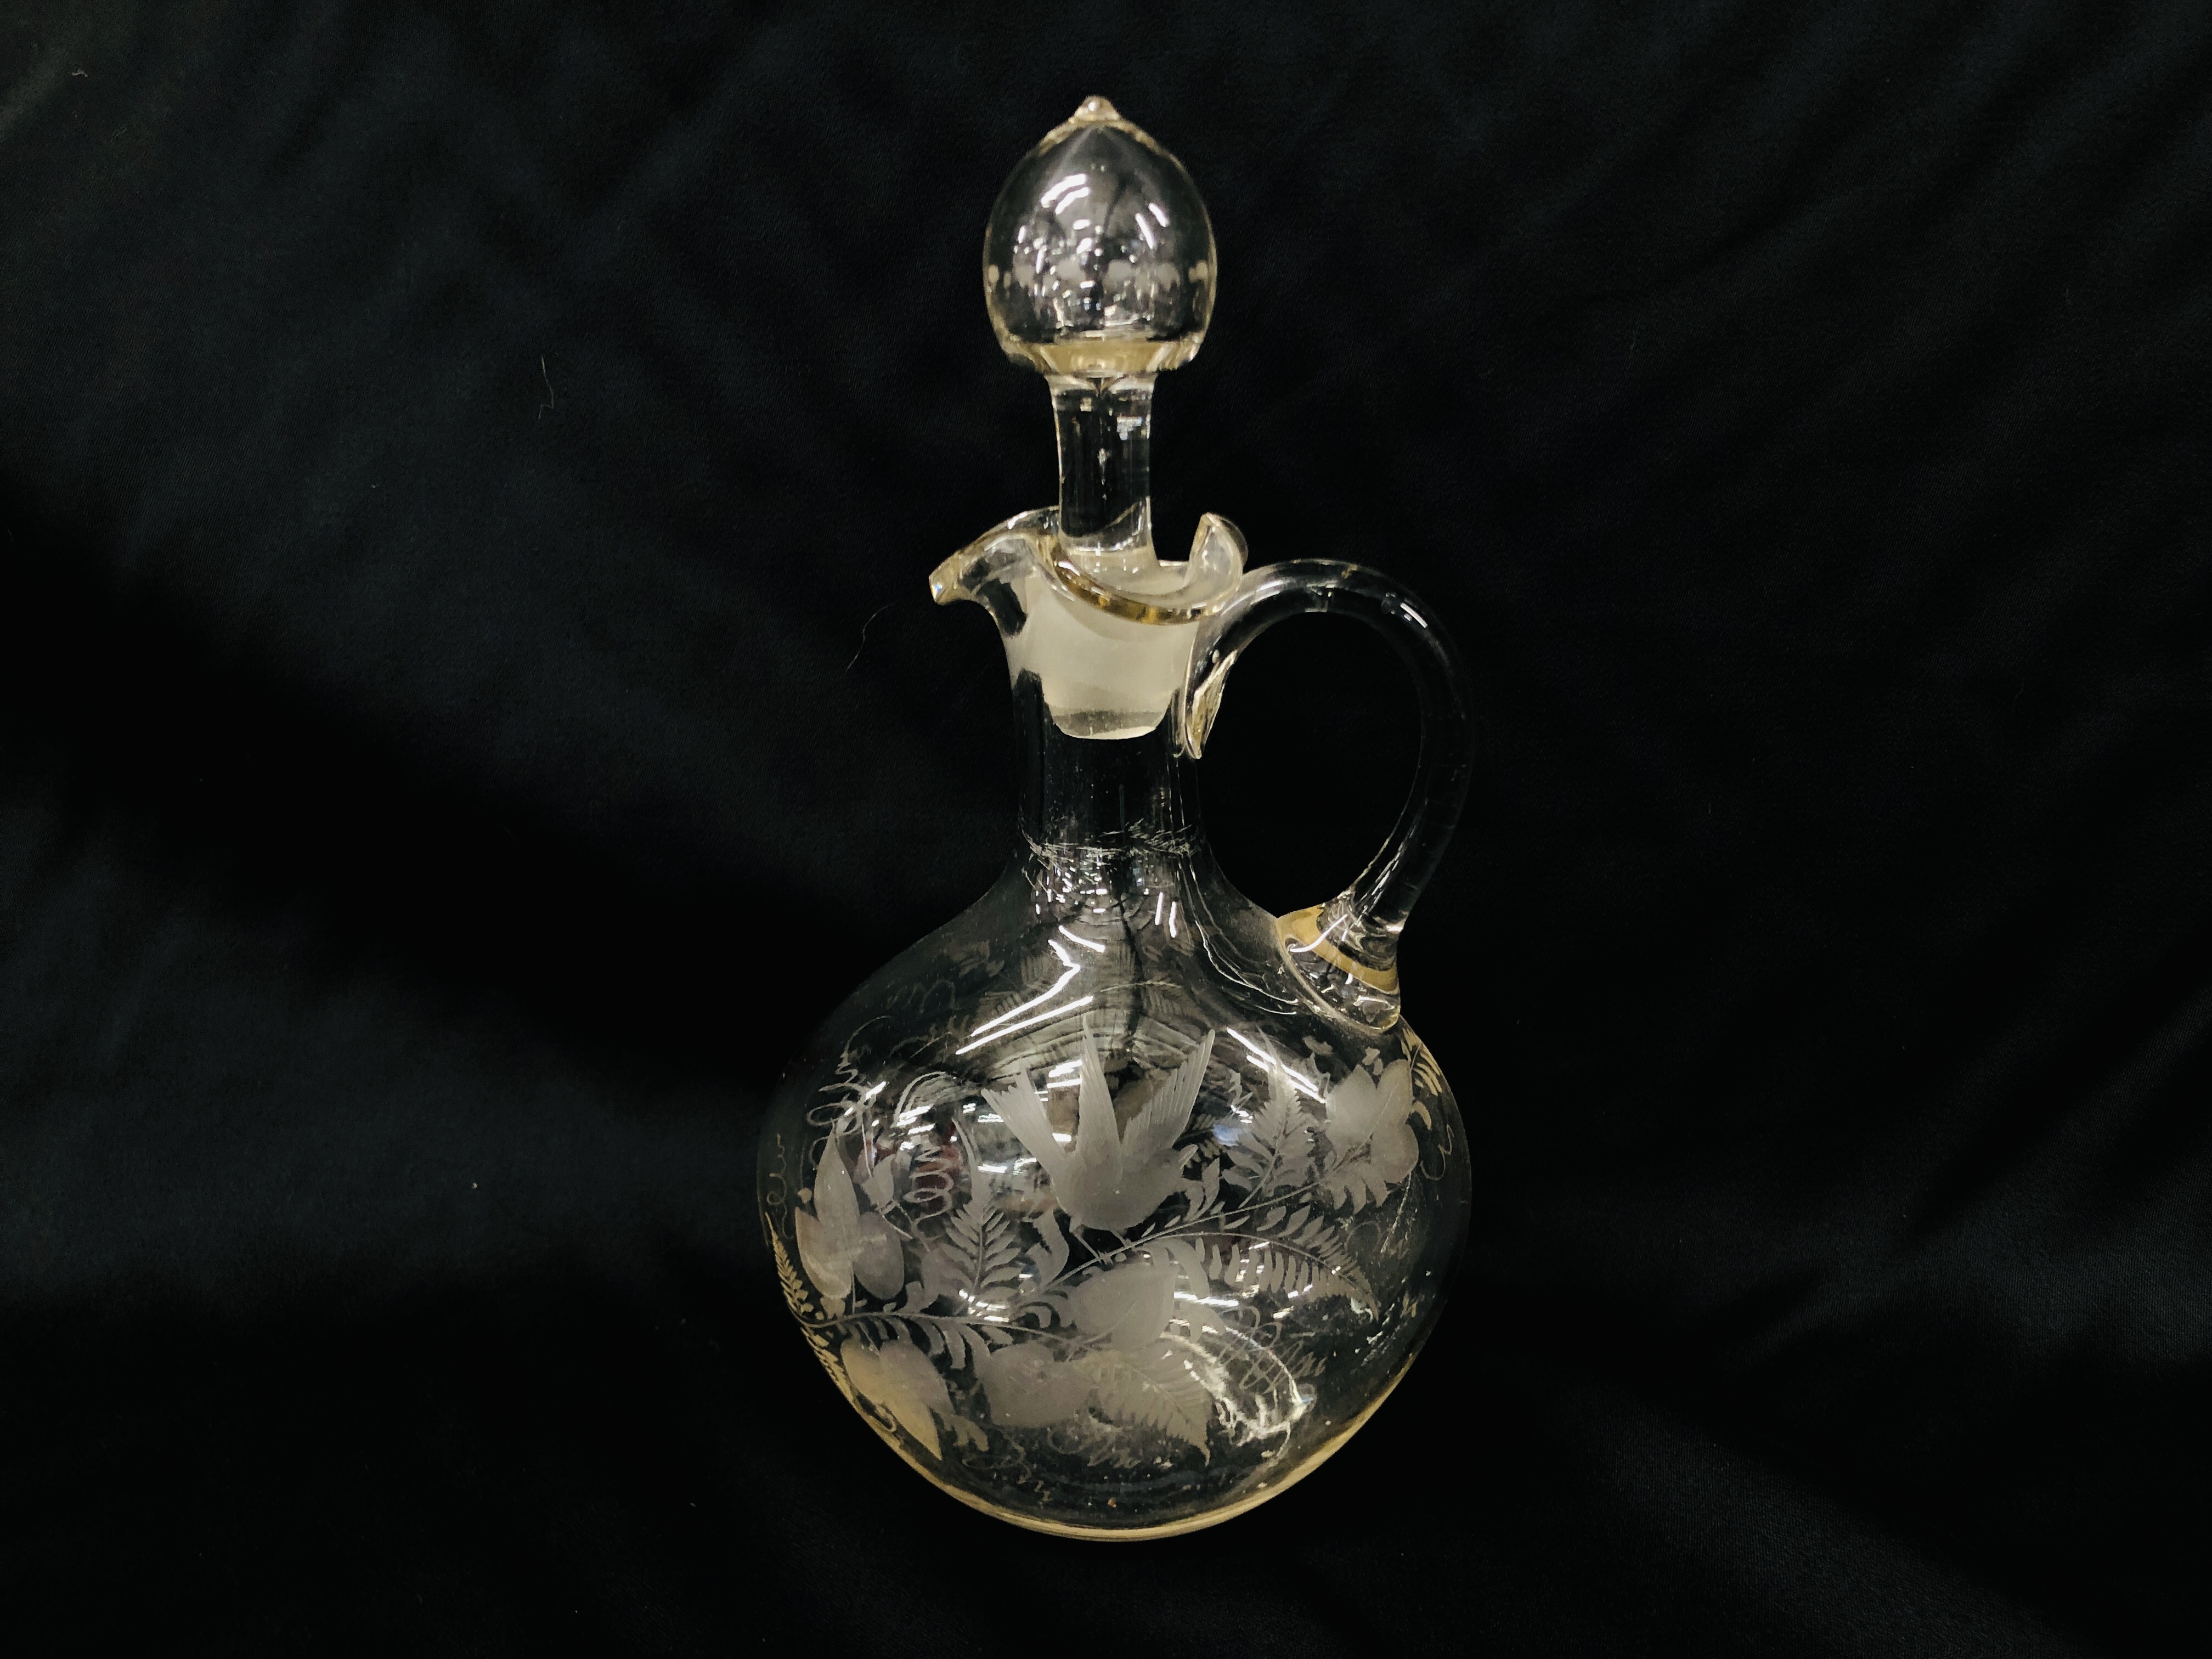 MARY GREGORY CRANBERRY VASE, VINTAGE CLEAR GLASS DECANTER WITH ETCHED FERN AND BIRD DESIGN. - Image 9 of 10